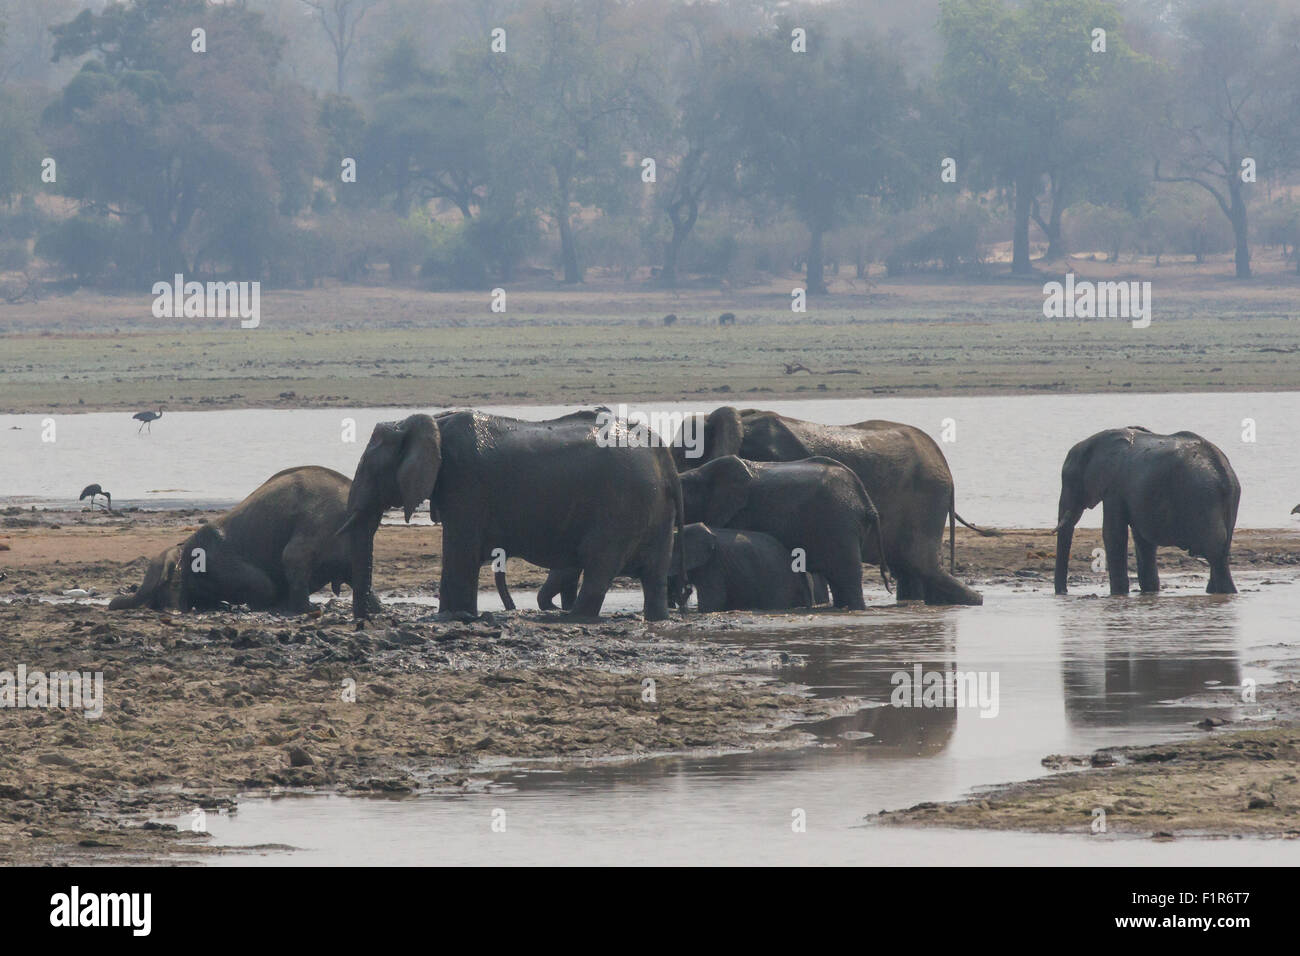 (150906) -- HARARE, Sept. 6, 2015 (Xinhua) -- Elephants walk by a river in the Gonarezhou National Park, southeast Zimbabwe, on Sept. 2, 2015. Situated in southeastern Zimbabwe, the 5,000 sq km Gonarezhou National Park is the second largest national park in the country, and forms part of one of the world's largest conservation areas-the Greater Limpopo Transfrontier Park, with the Kruger National Park of South Africa to the south and the Limpopo National Park of Mozambique to the southeast. Gonarezhou, which is translated as 'the place of elephants' in local Shona language, also has one of the Stock Photo